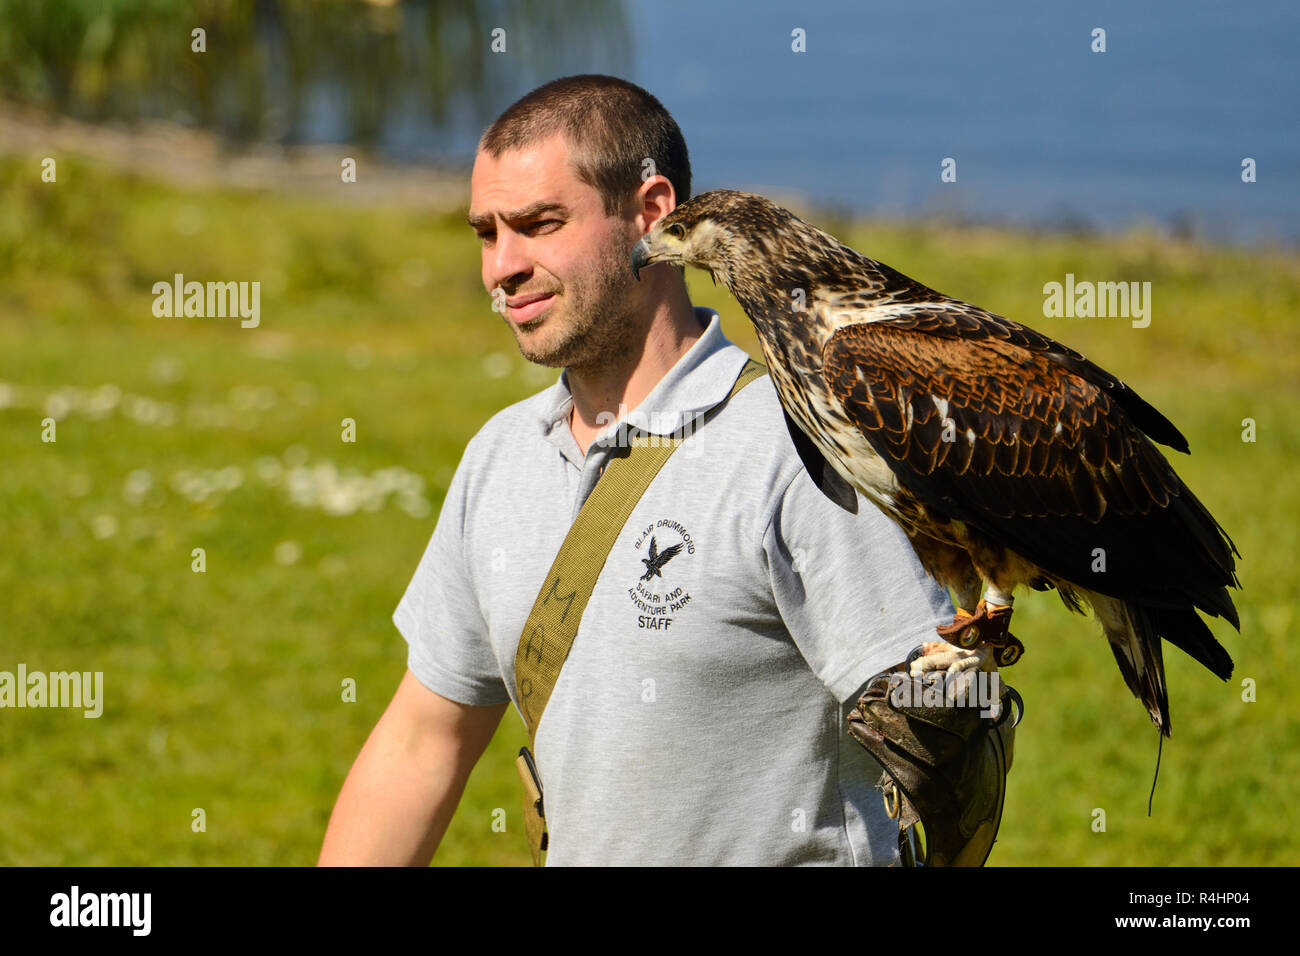 Red Tailed Hawk (Buteo jamaicensis) with handler at birds of prey flying display at Blair Drummond Safari Park, near Stirling, Scotland, UK Stock Photo